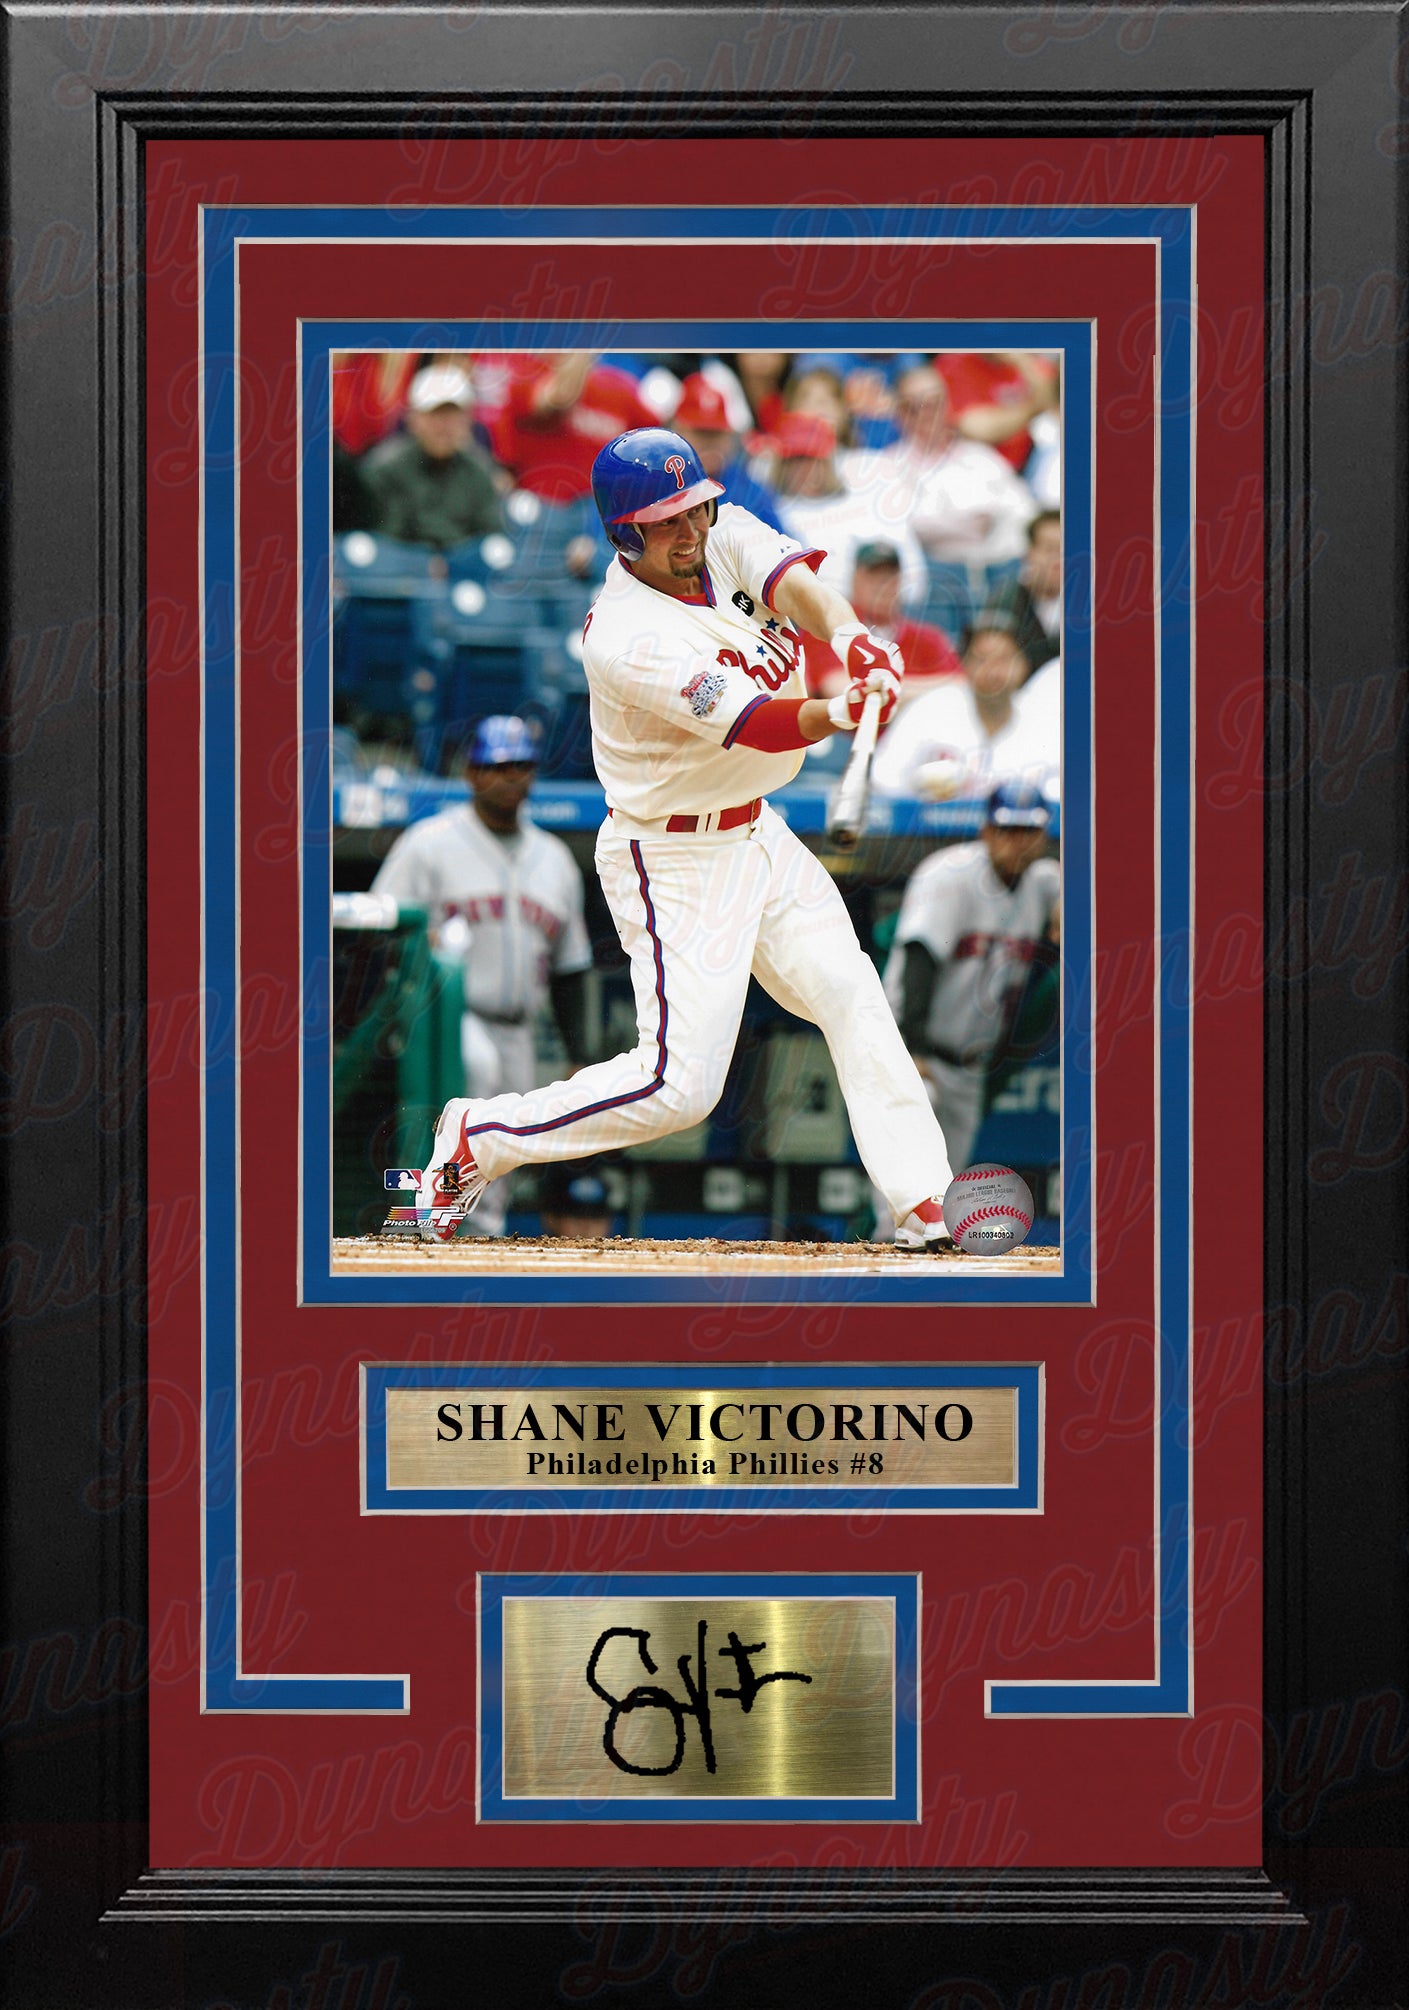 Shane Victorino in Action Philadelphia Phillies 8" x 10" Framed Baseball Photo with Engraved Autograph - Dynasty Sports & Framing 